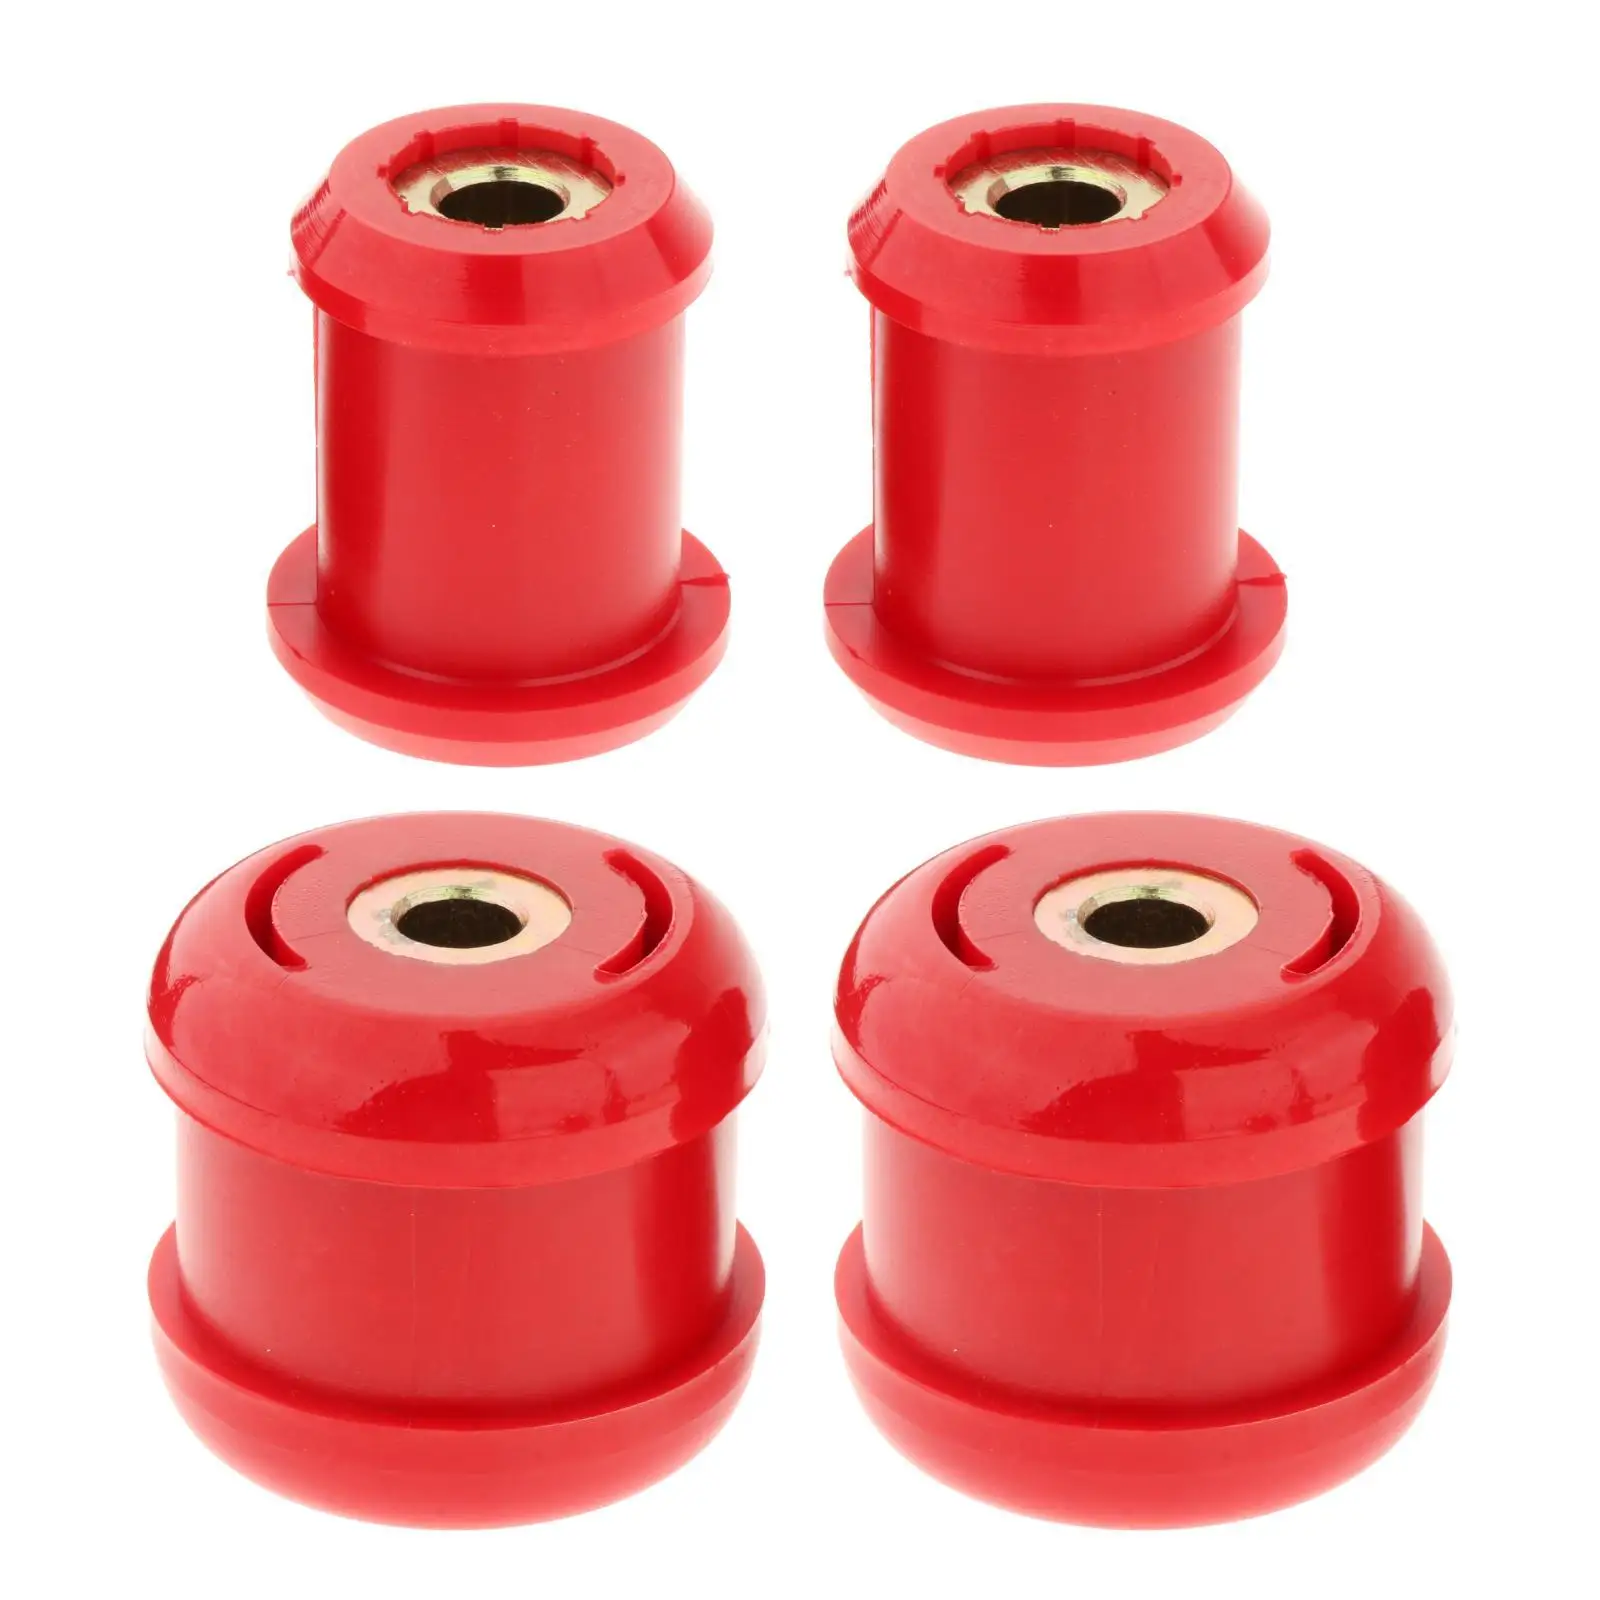 Control Arm Bushing Car Parts Replacement Accessories Fit for Honda Civic 2001-2005